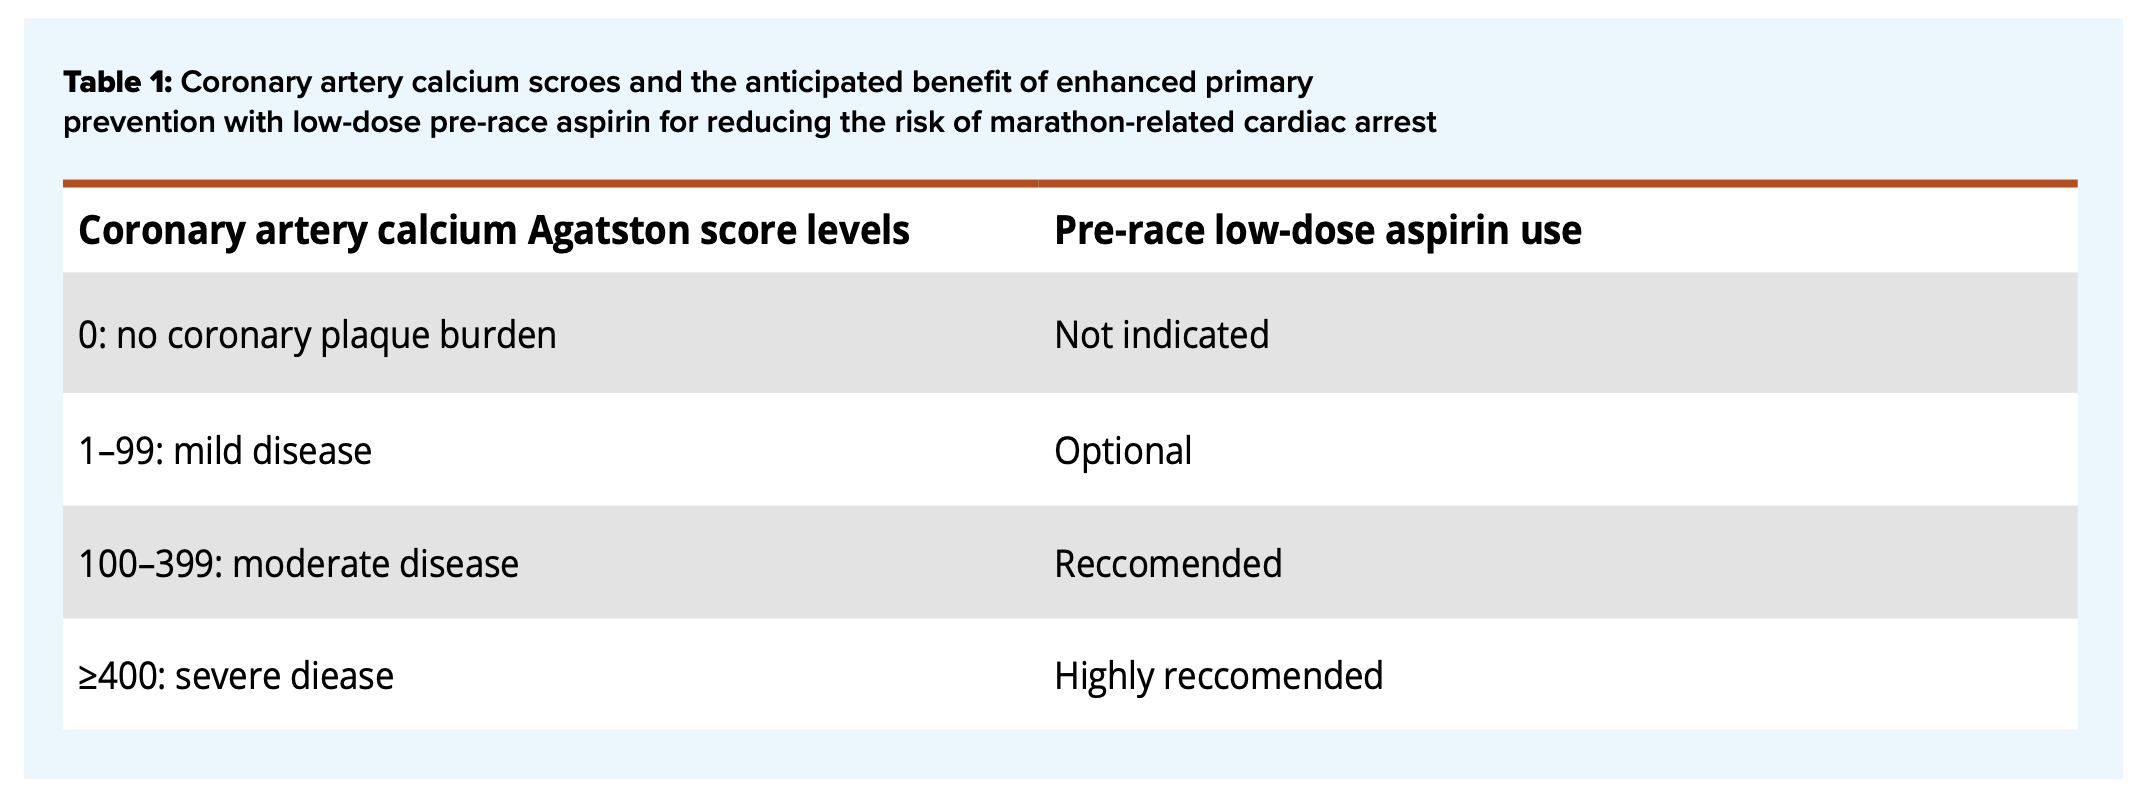 * Adapted from: Siegel A. Pre-race aspirin to attenuate the risk for marathon-related cardiac arrest: deconstructing the legacy of Pheidippides. Eur Heart J. 2023, ehad641.https://doi.org/10.1093/eurheartj/ehad641.